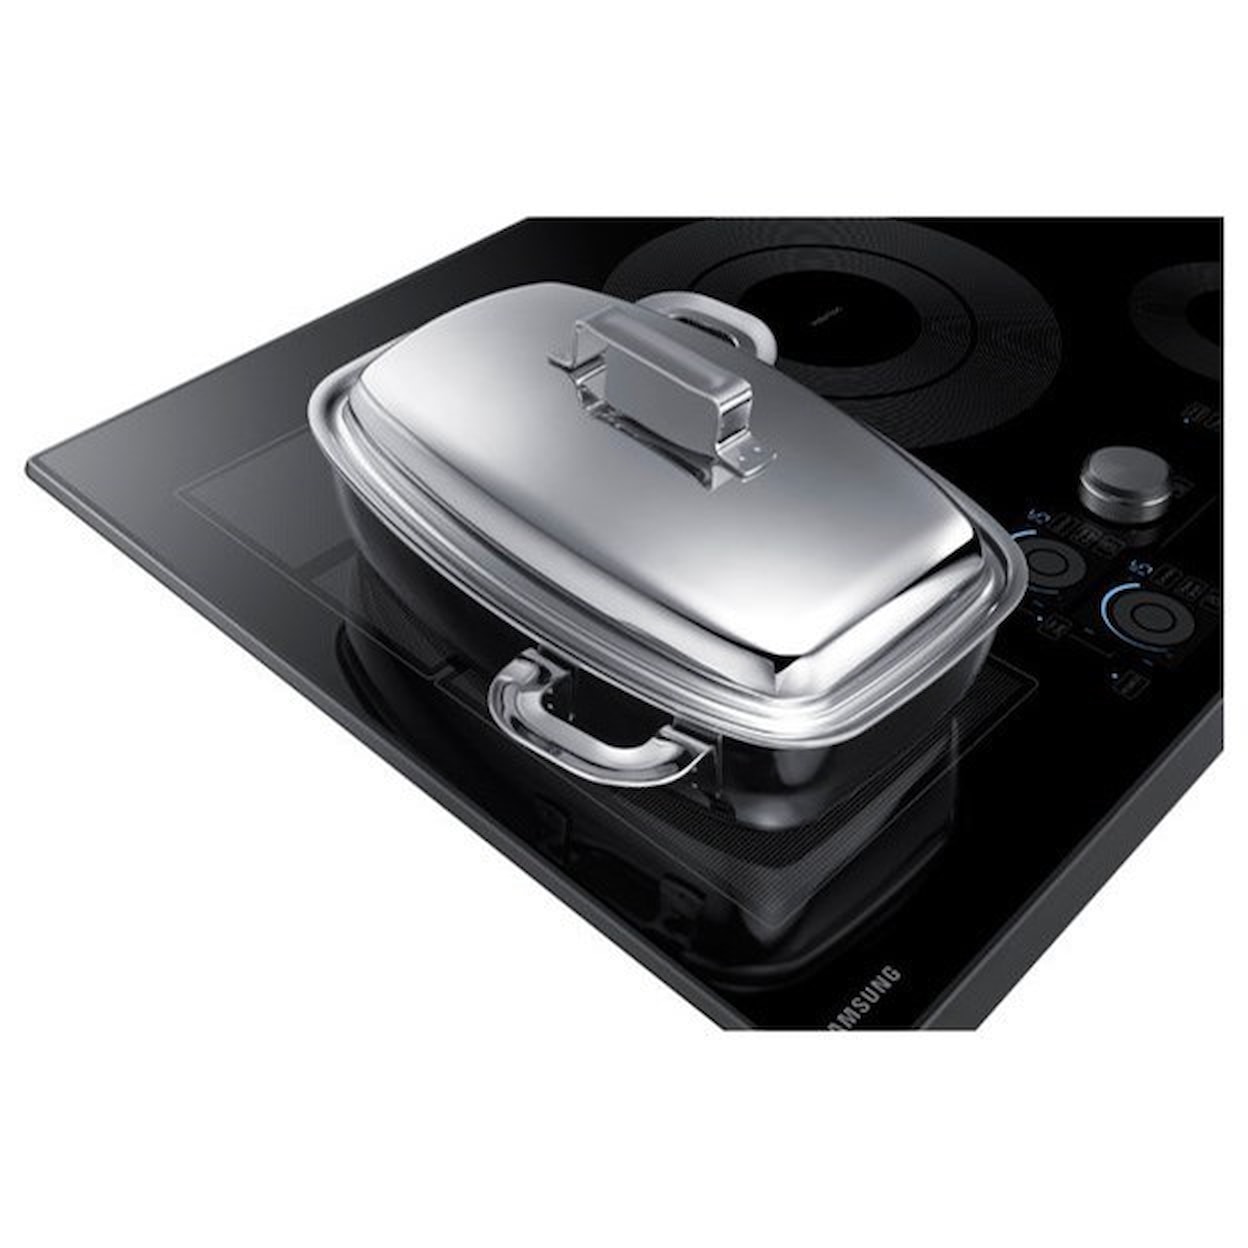 Samsung Appliances Electric Cooktops - Samsung 30" Induction Cooktop